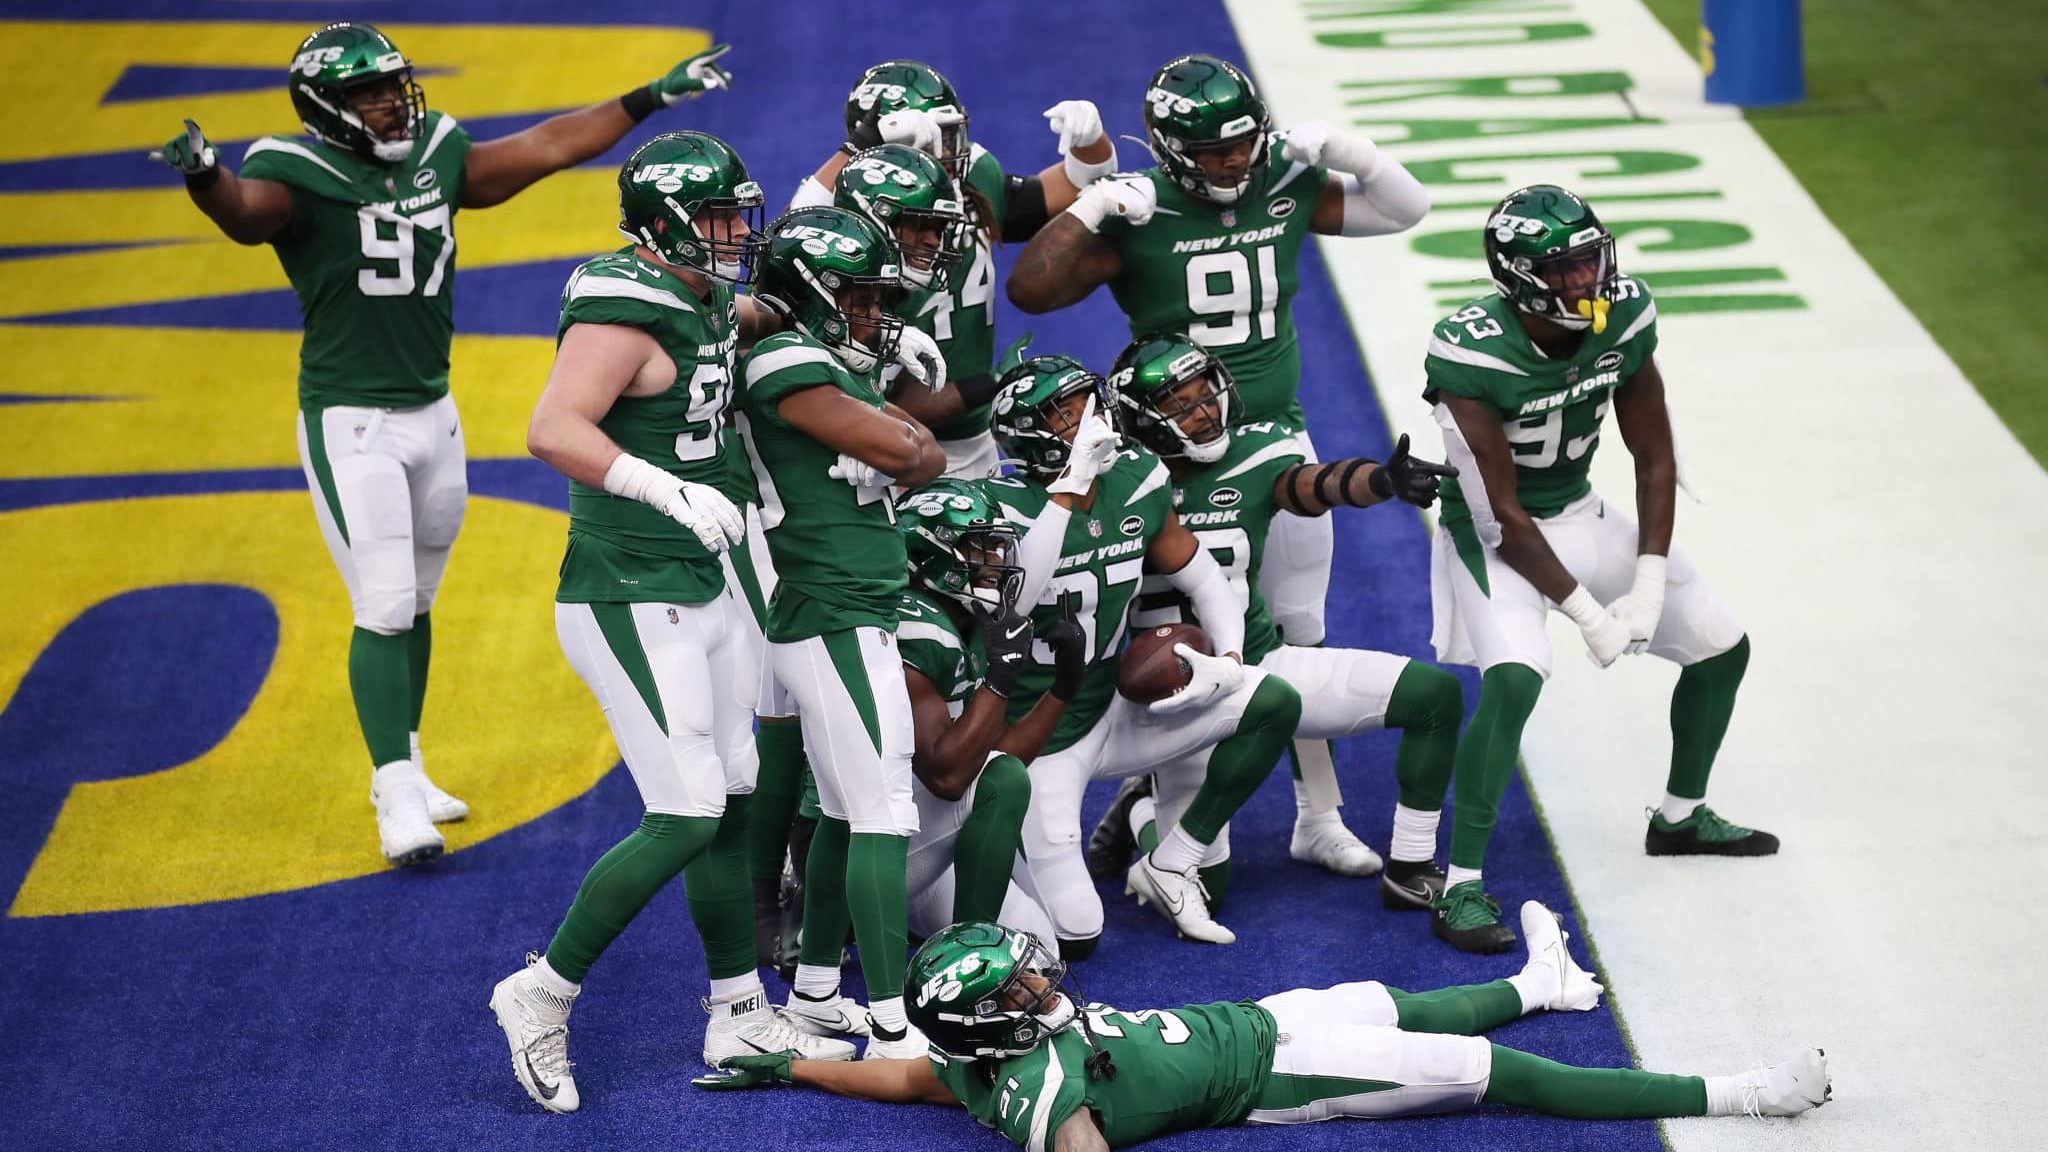 INGLEWOOD, CALIFORNIA - DECEMBER 20: New York Jets pose for a photo following a touchdown during the first quarter of a game against the Los Angeles Rams at SoFi Stadium on December 20, 2020 in Inglewood, California.